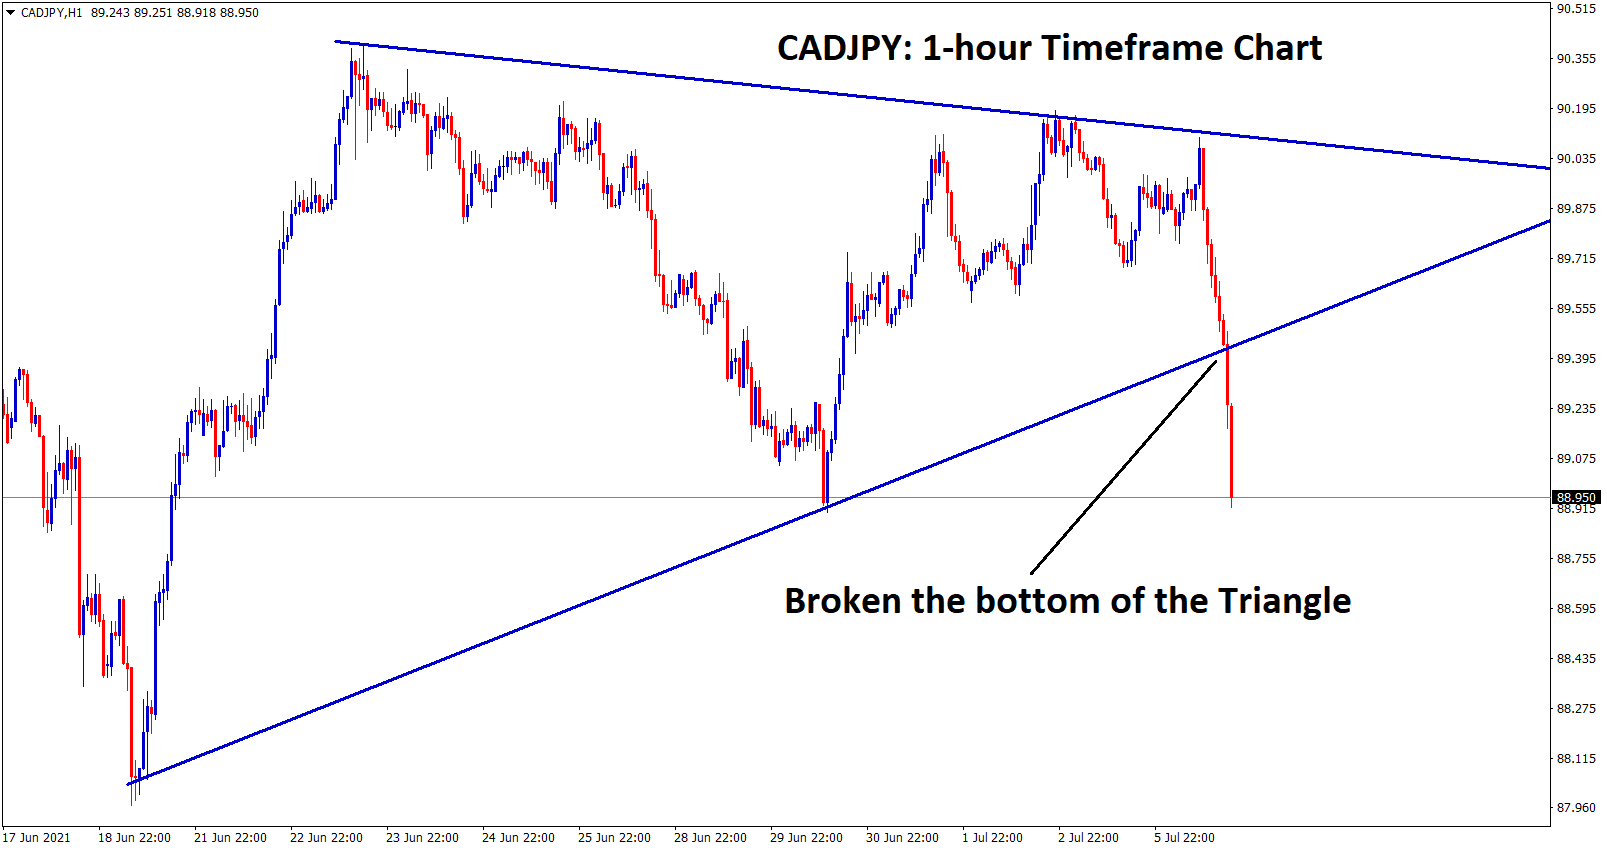 cadjpy has broken the bottom level of the Triangle in the 1 hour chart